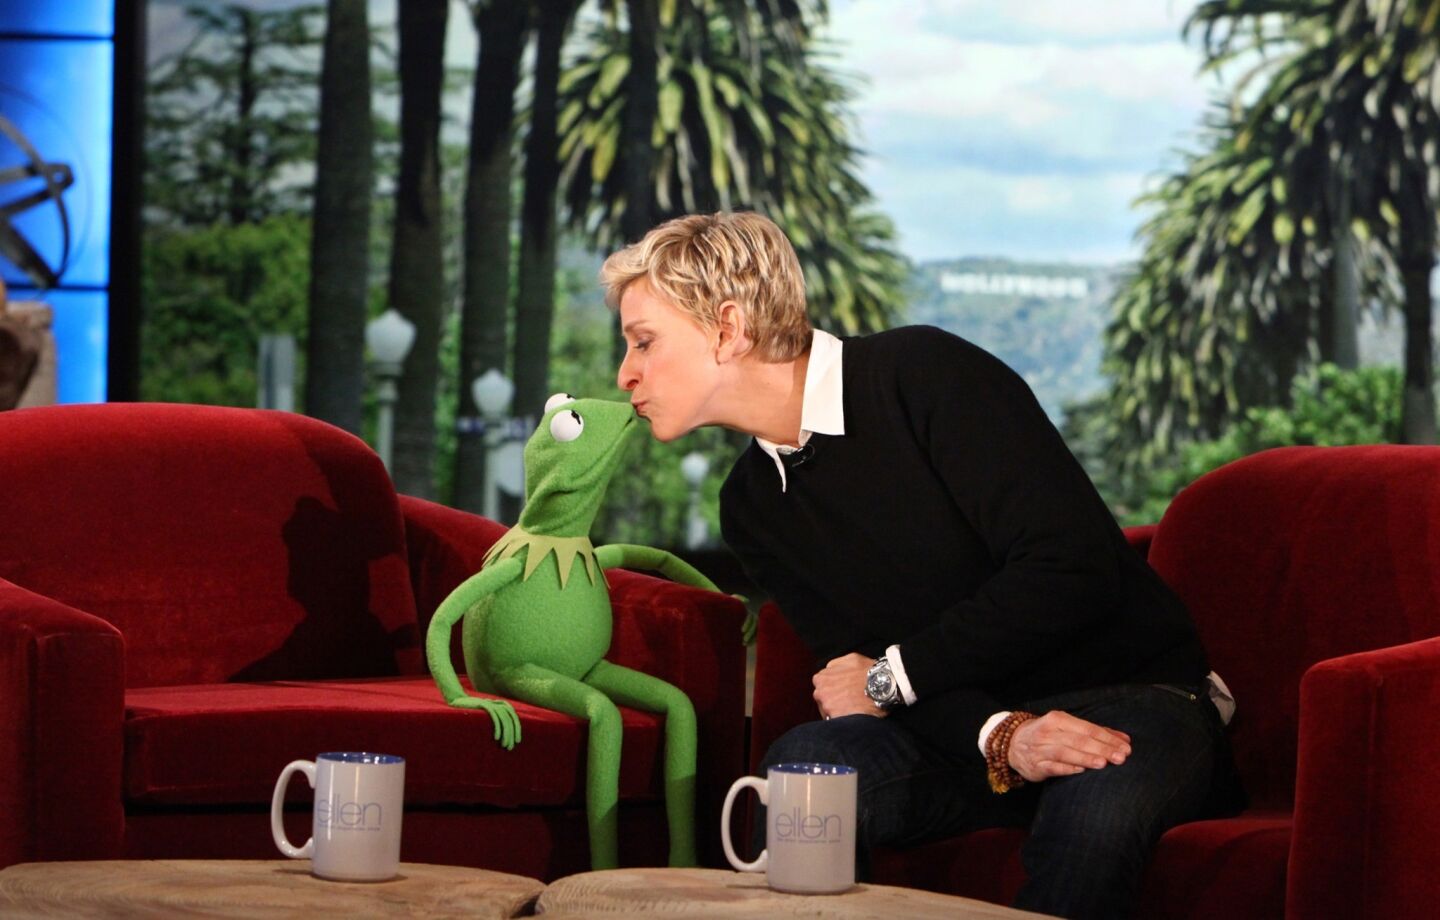 Warner Bros. announced that "The Ellen DeGeneres Show" had been renewed through the 2016-2017 television season. The daytime talk show, now in its 10th season, continues to see ratings climb.